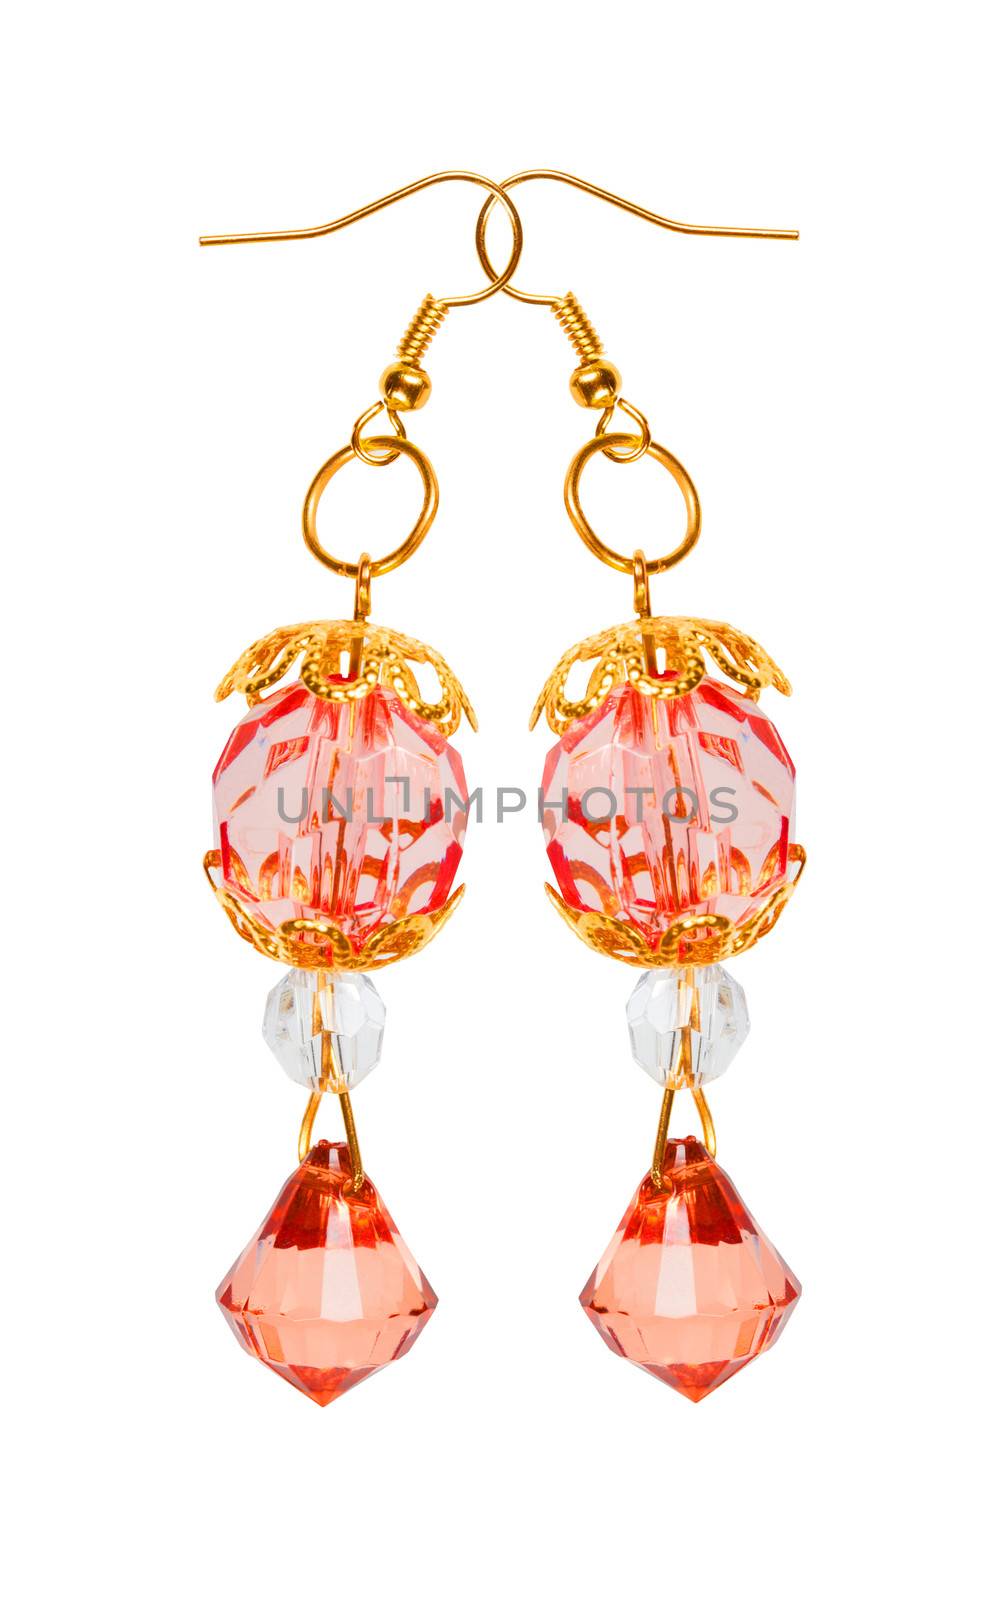 Earrings in red glass with gold elements. white background  by AleksandrN